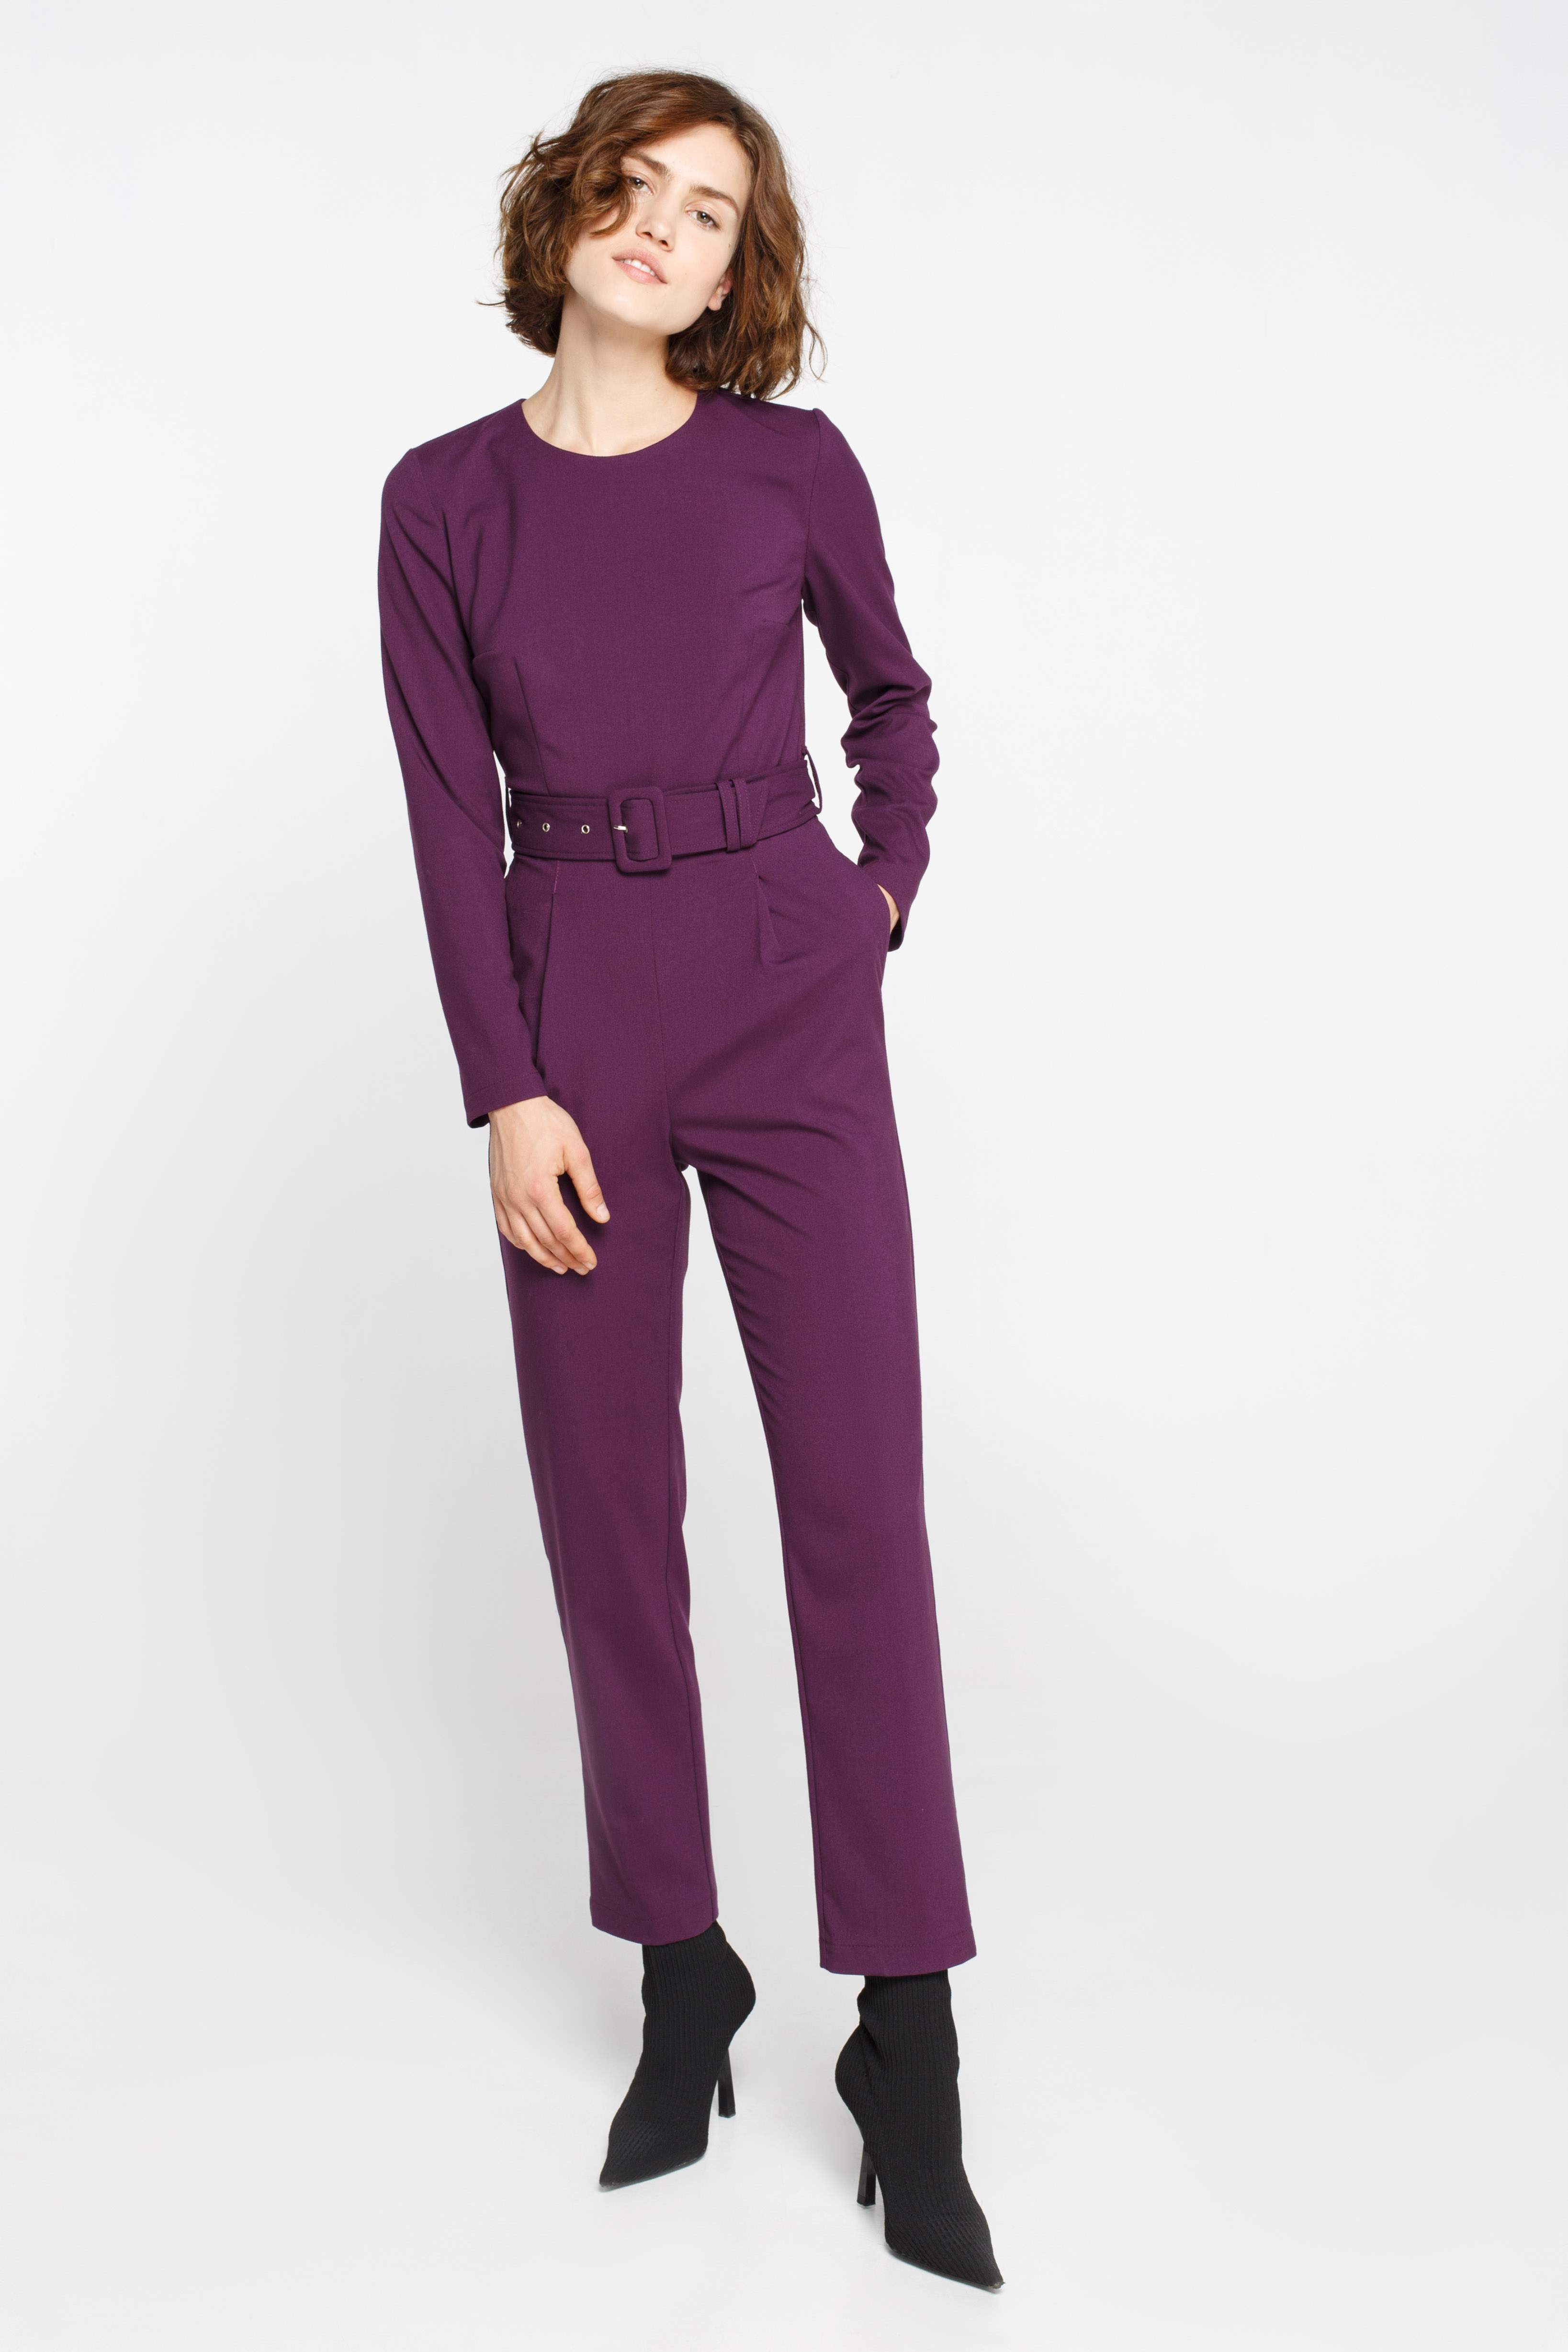 Purple jumpsuit with long sleeves and a belt, photo 4